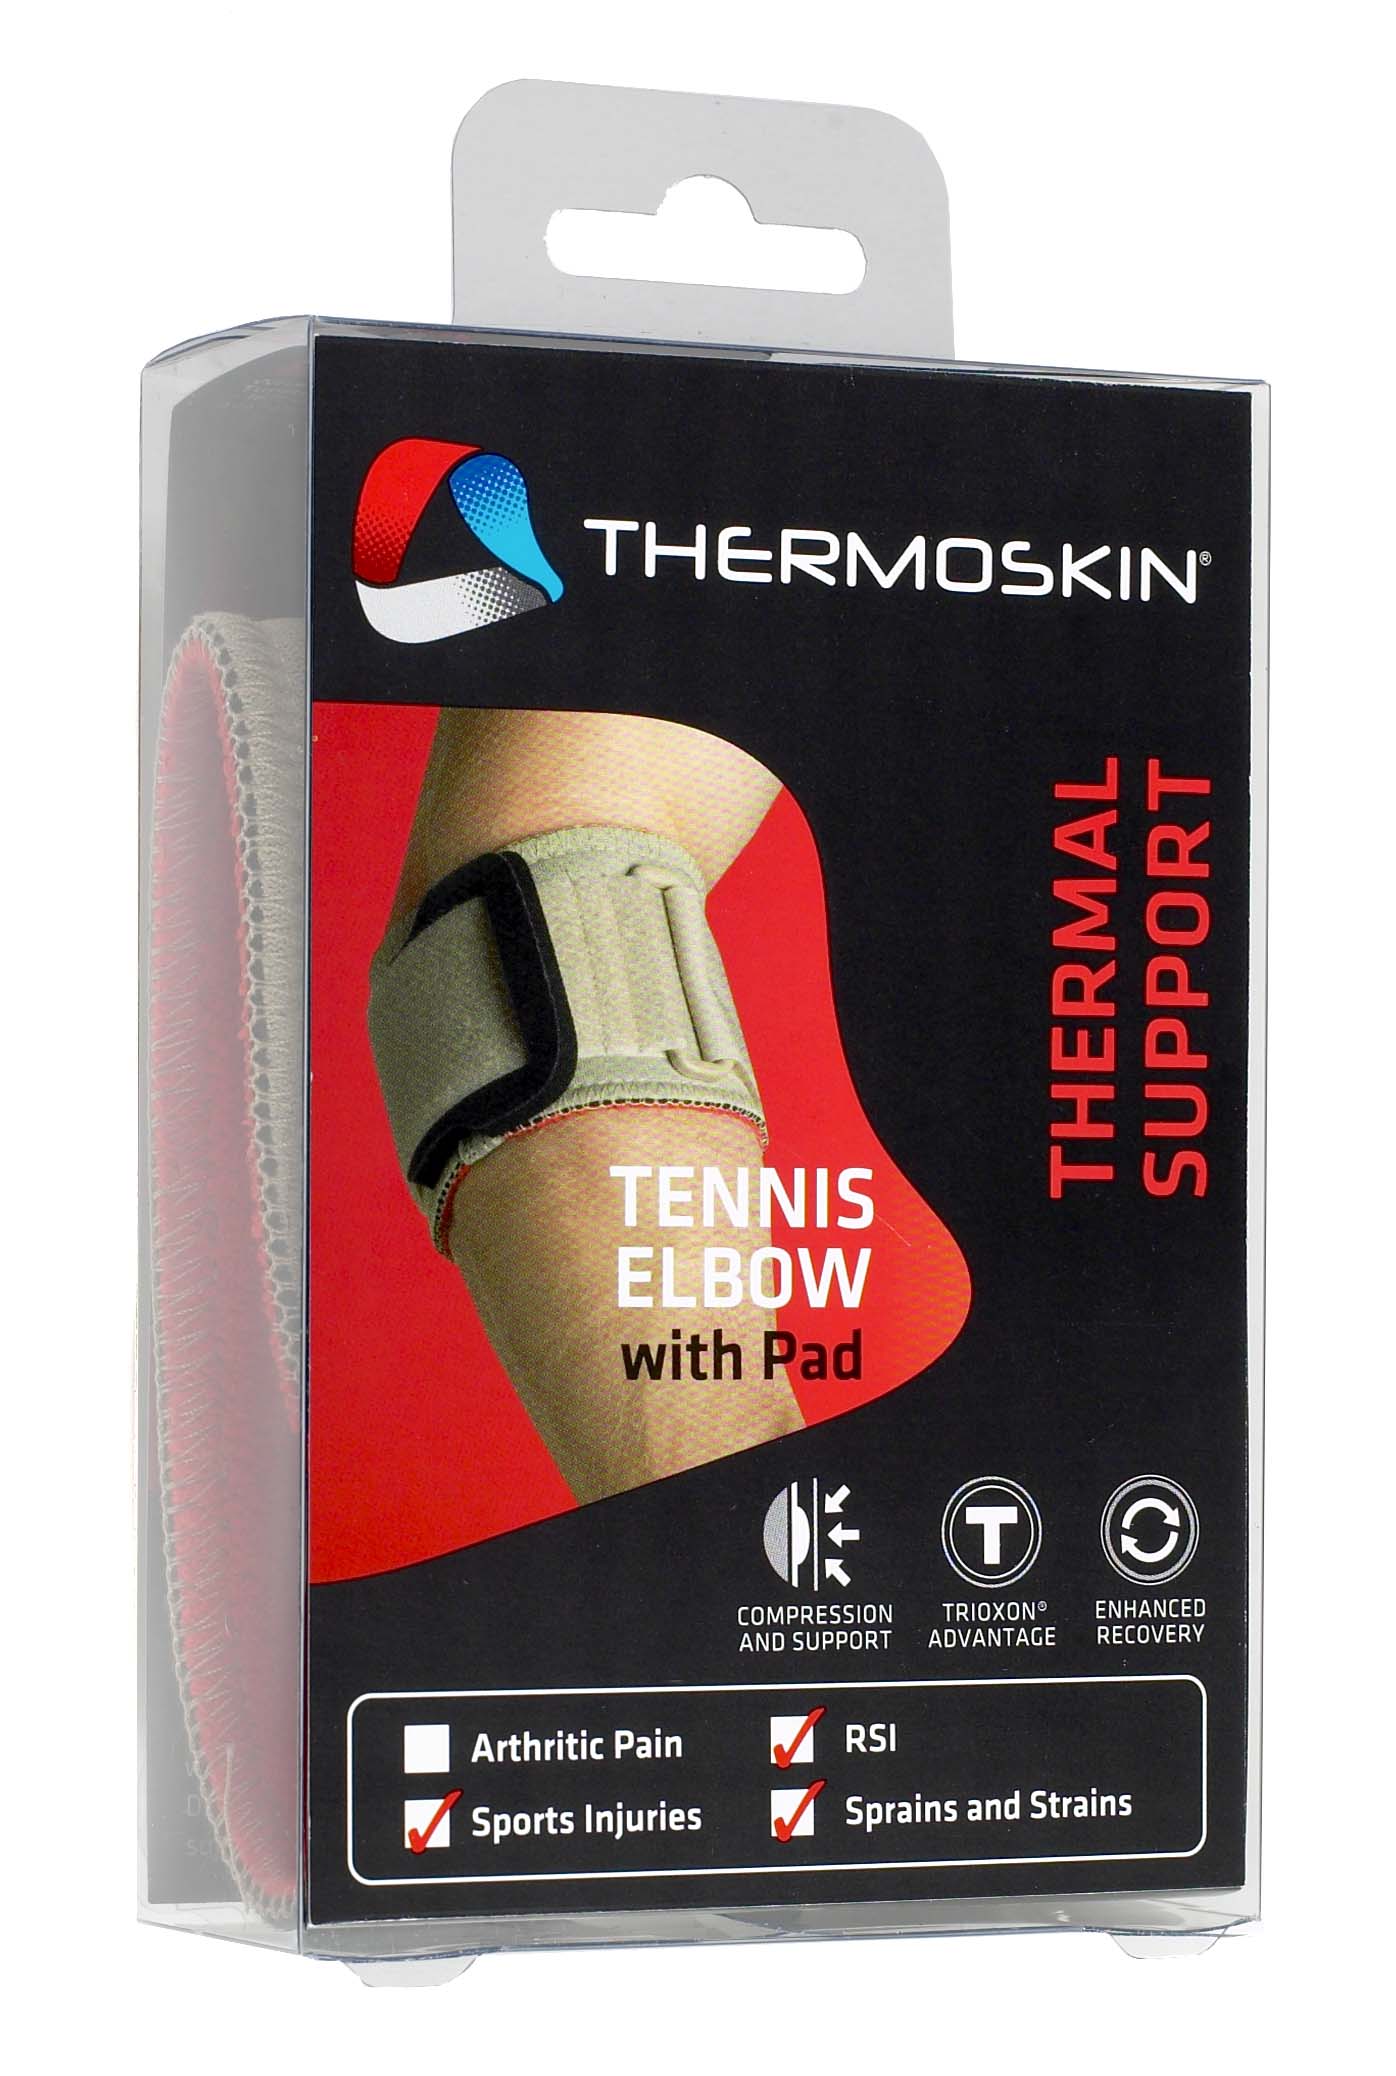 Thermoskin Thermal Support Tennis Elbow with Pad Compression Support  Size M 